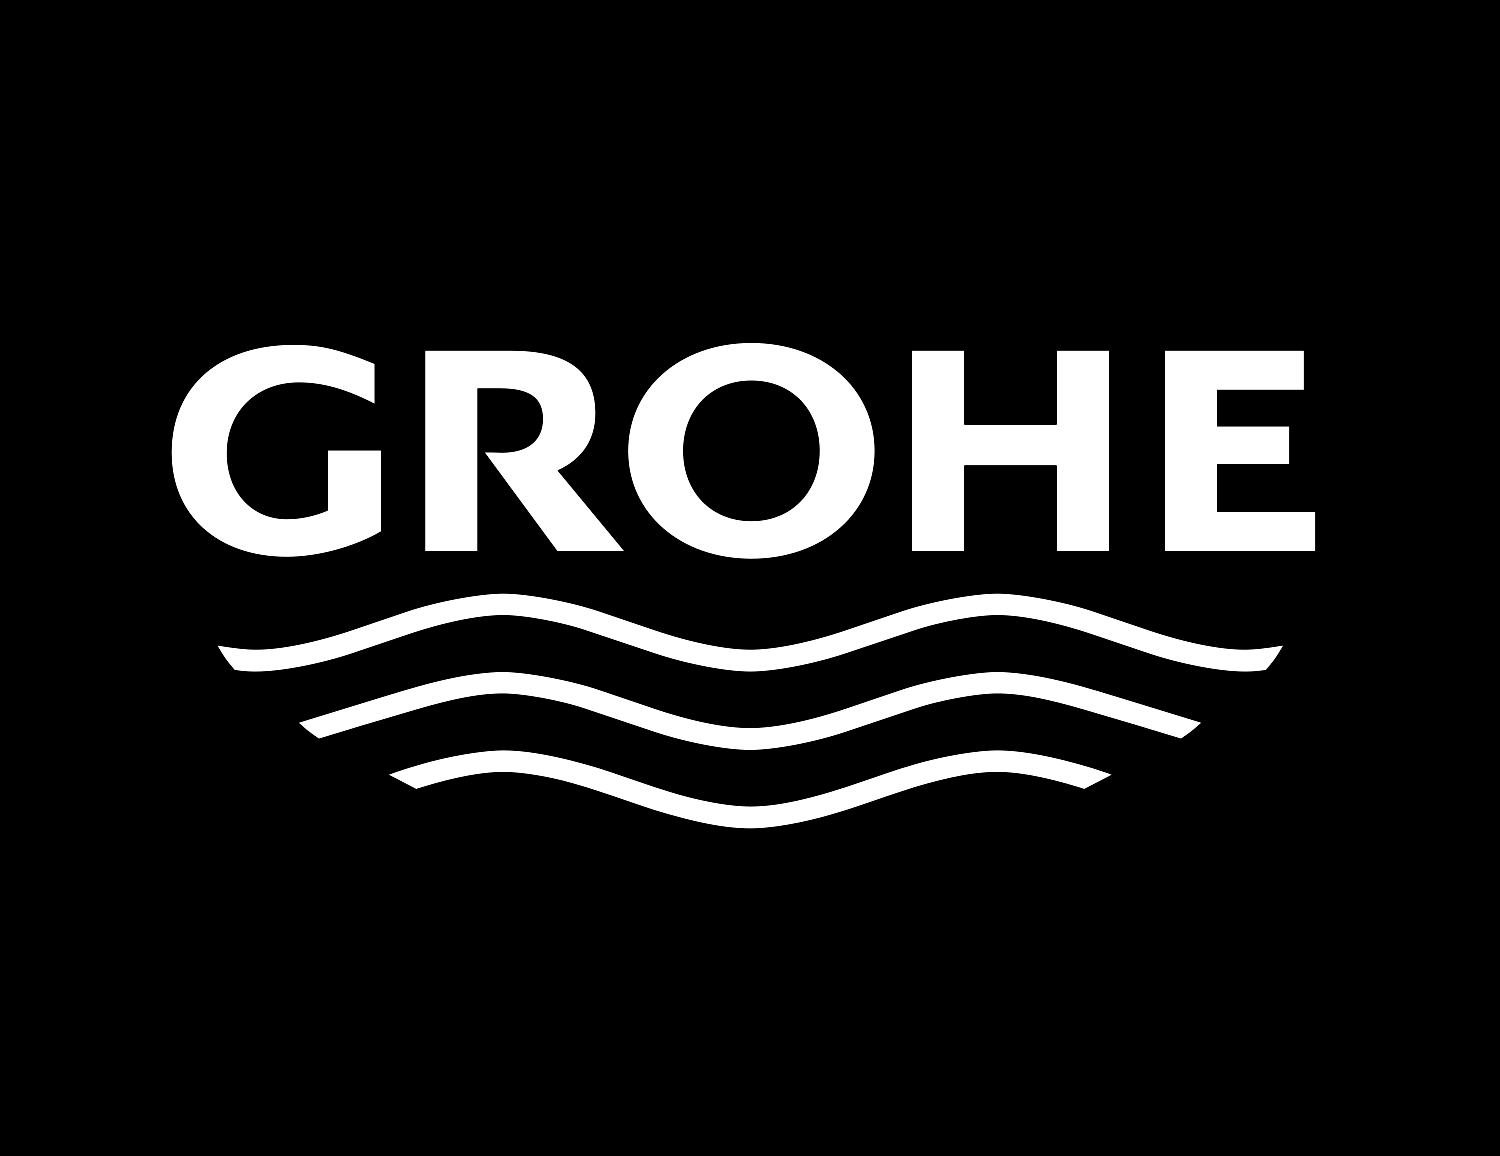 Grohe Spa | Aquatecture: the fusion of water and architecture